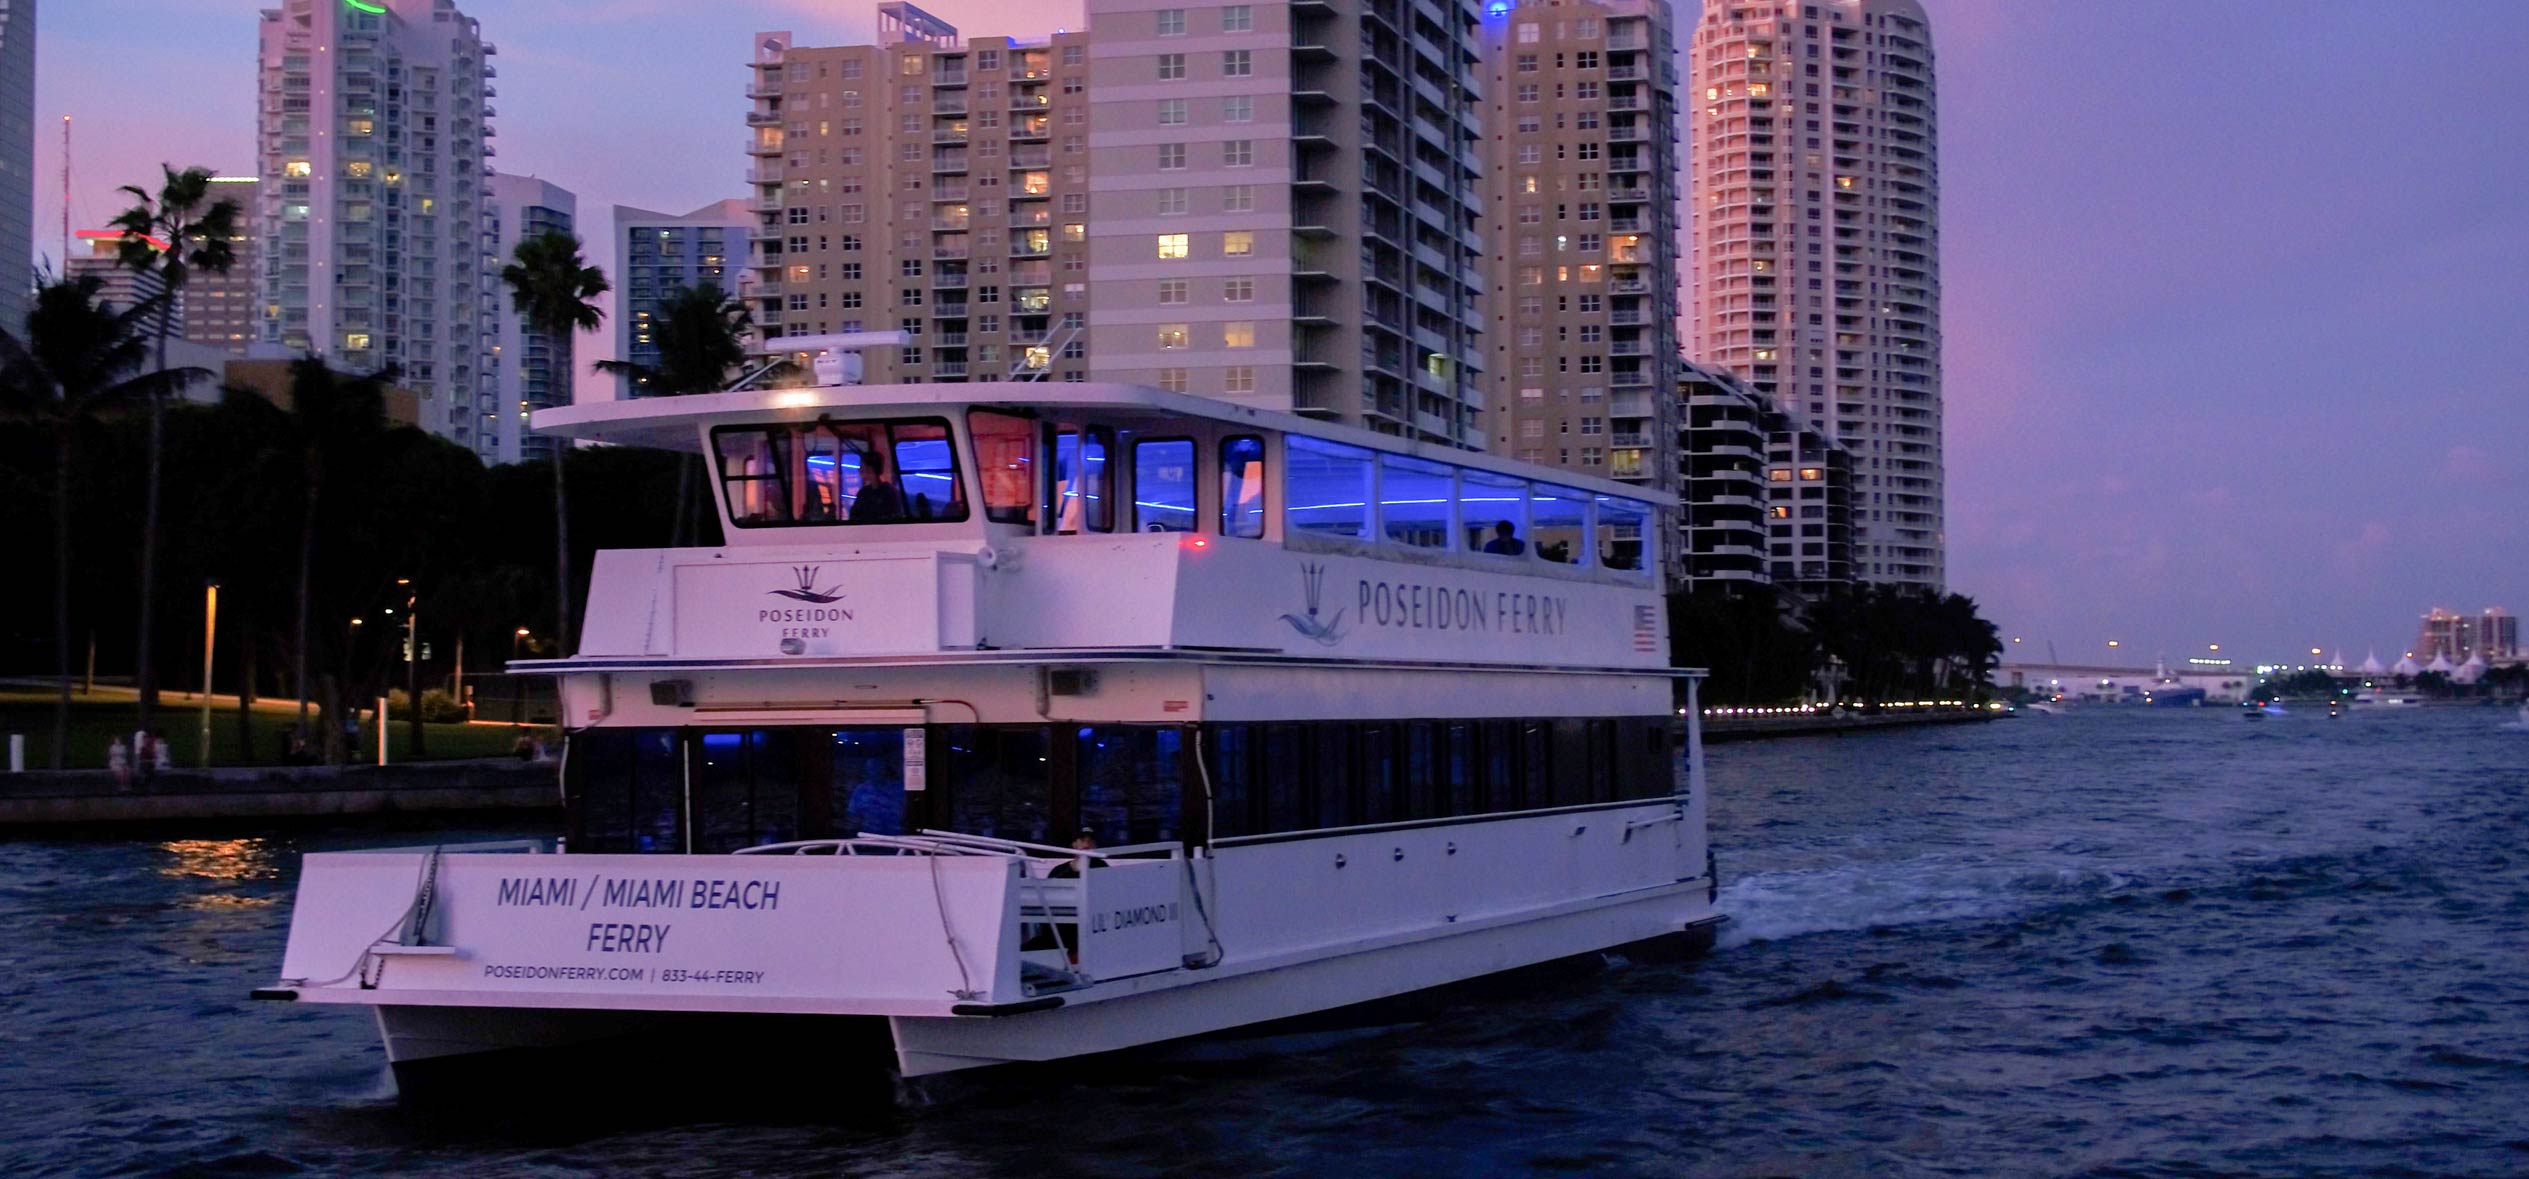 The Poseidon Ferry cruises during the dusk to reveal the city skyline lights. 